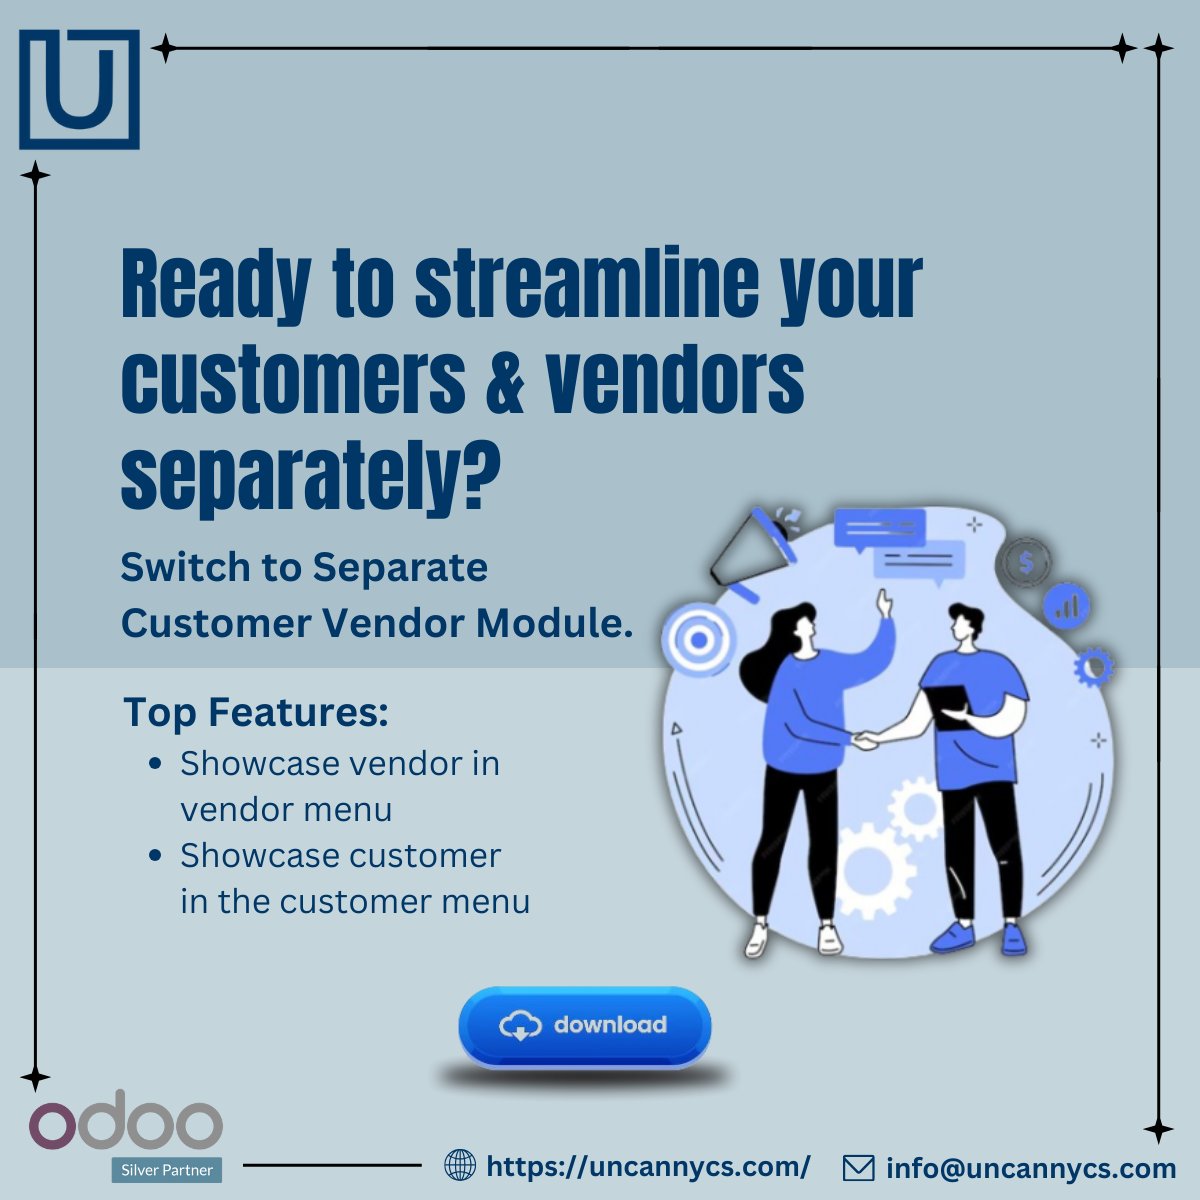 Did you know that?  You can separate your customer and vendor effortlessly.
 apps.odoo.com/apps/modules/1…

#Uncannycs #separatecustomer #streamlinebusiness #odooapps #vendormanagement